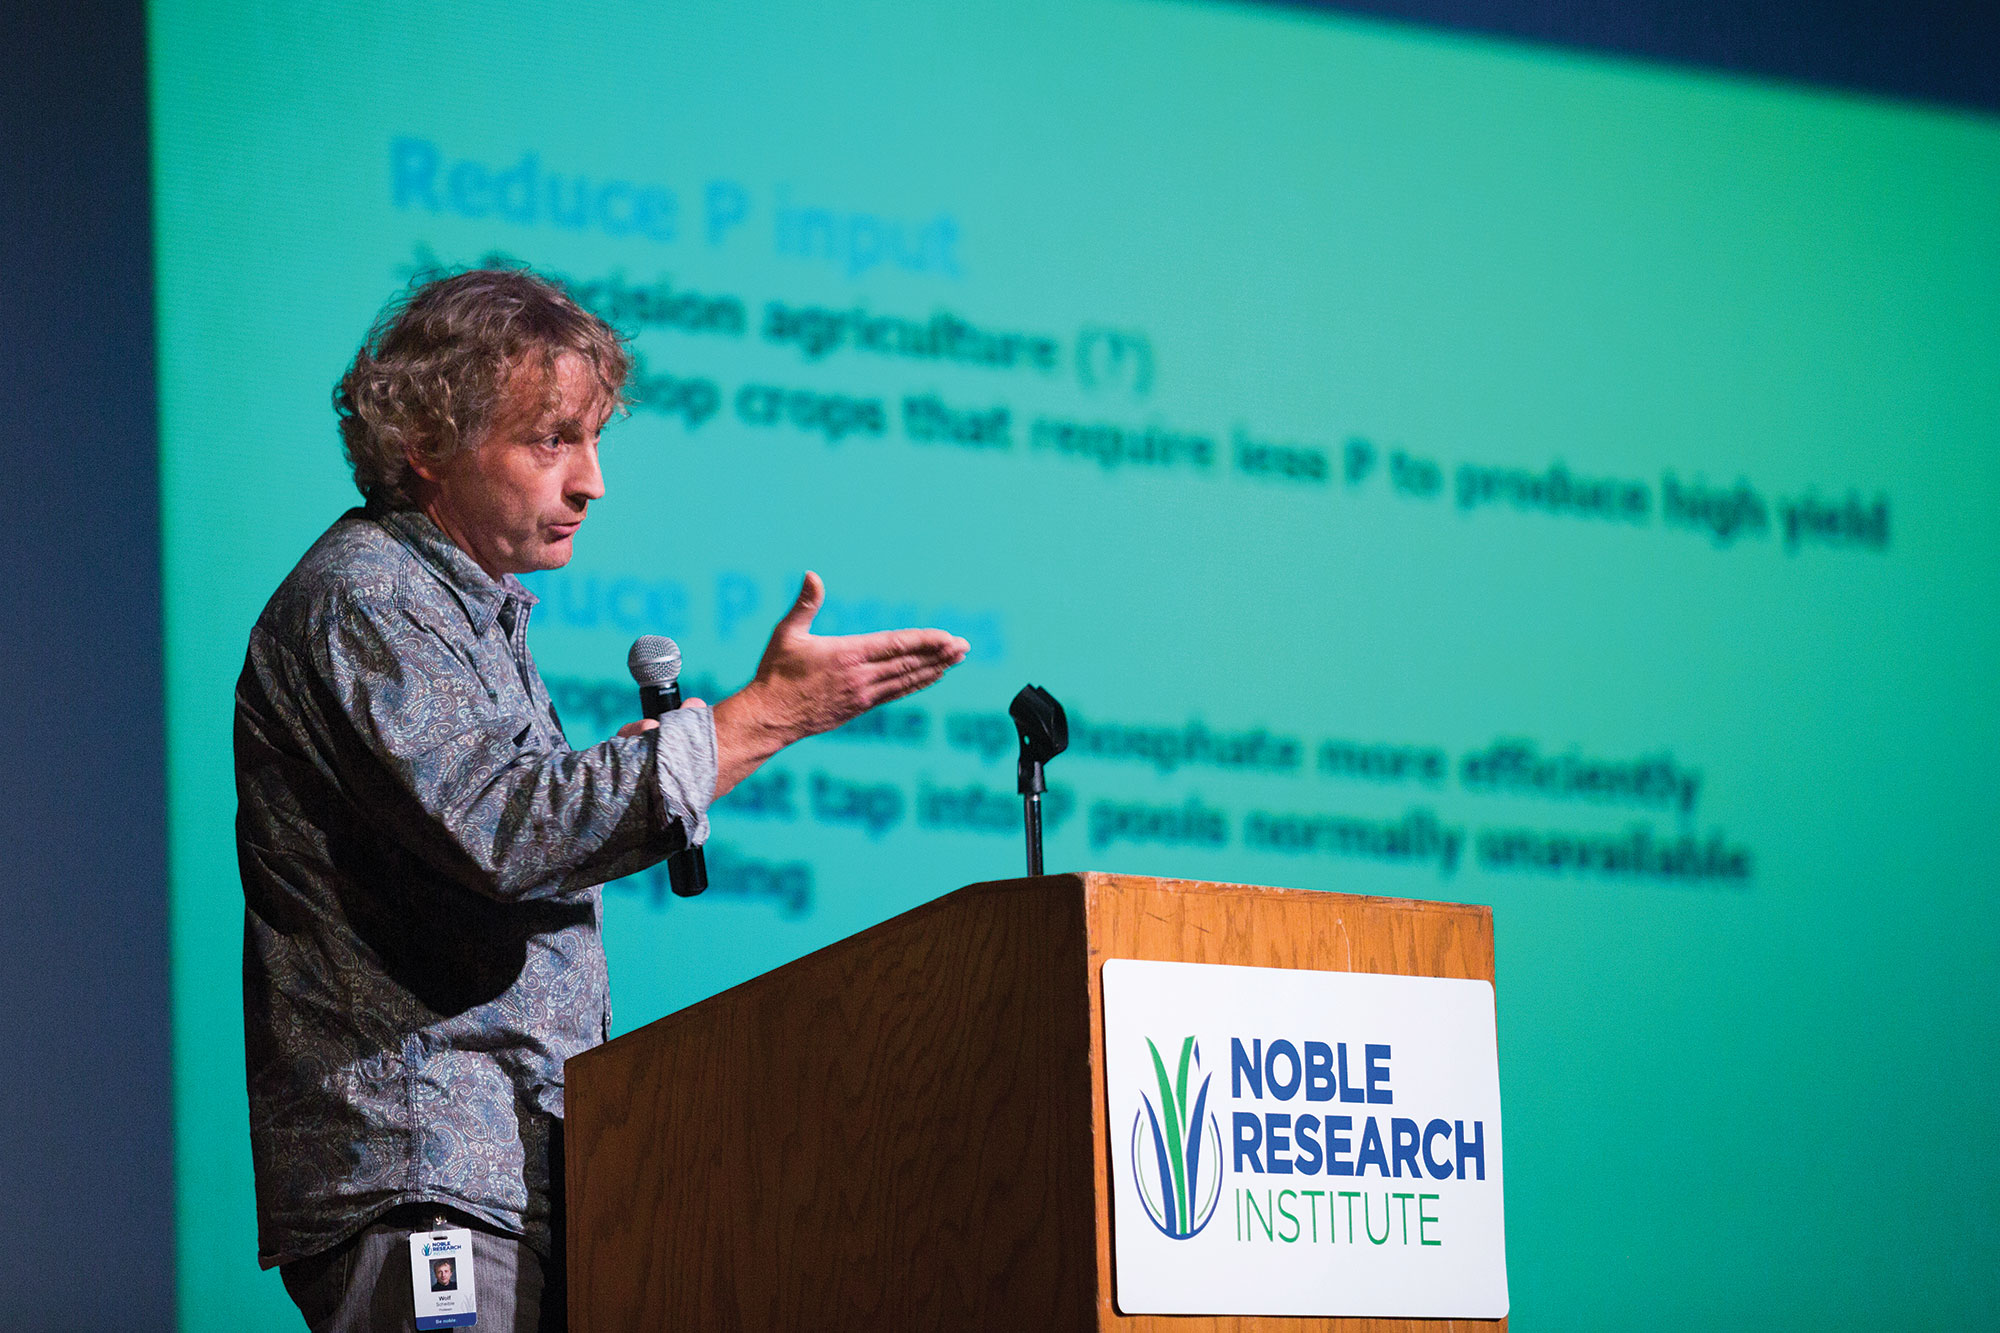 Wolf Scheible, Ph.D., shares the potential of peptides to improve plant performance and decrease fertilizer use when applied in conjunction with precision agriculture (using only the right amount at the right time in the right places). This could present farmers and ranchers with an ecological and economic advantage.